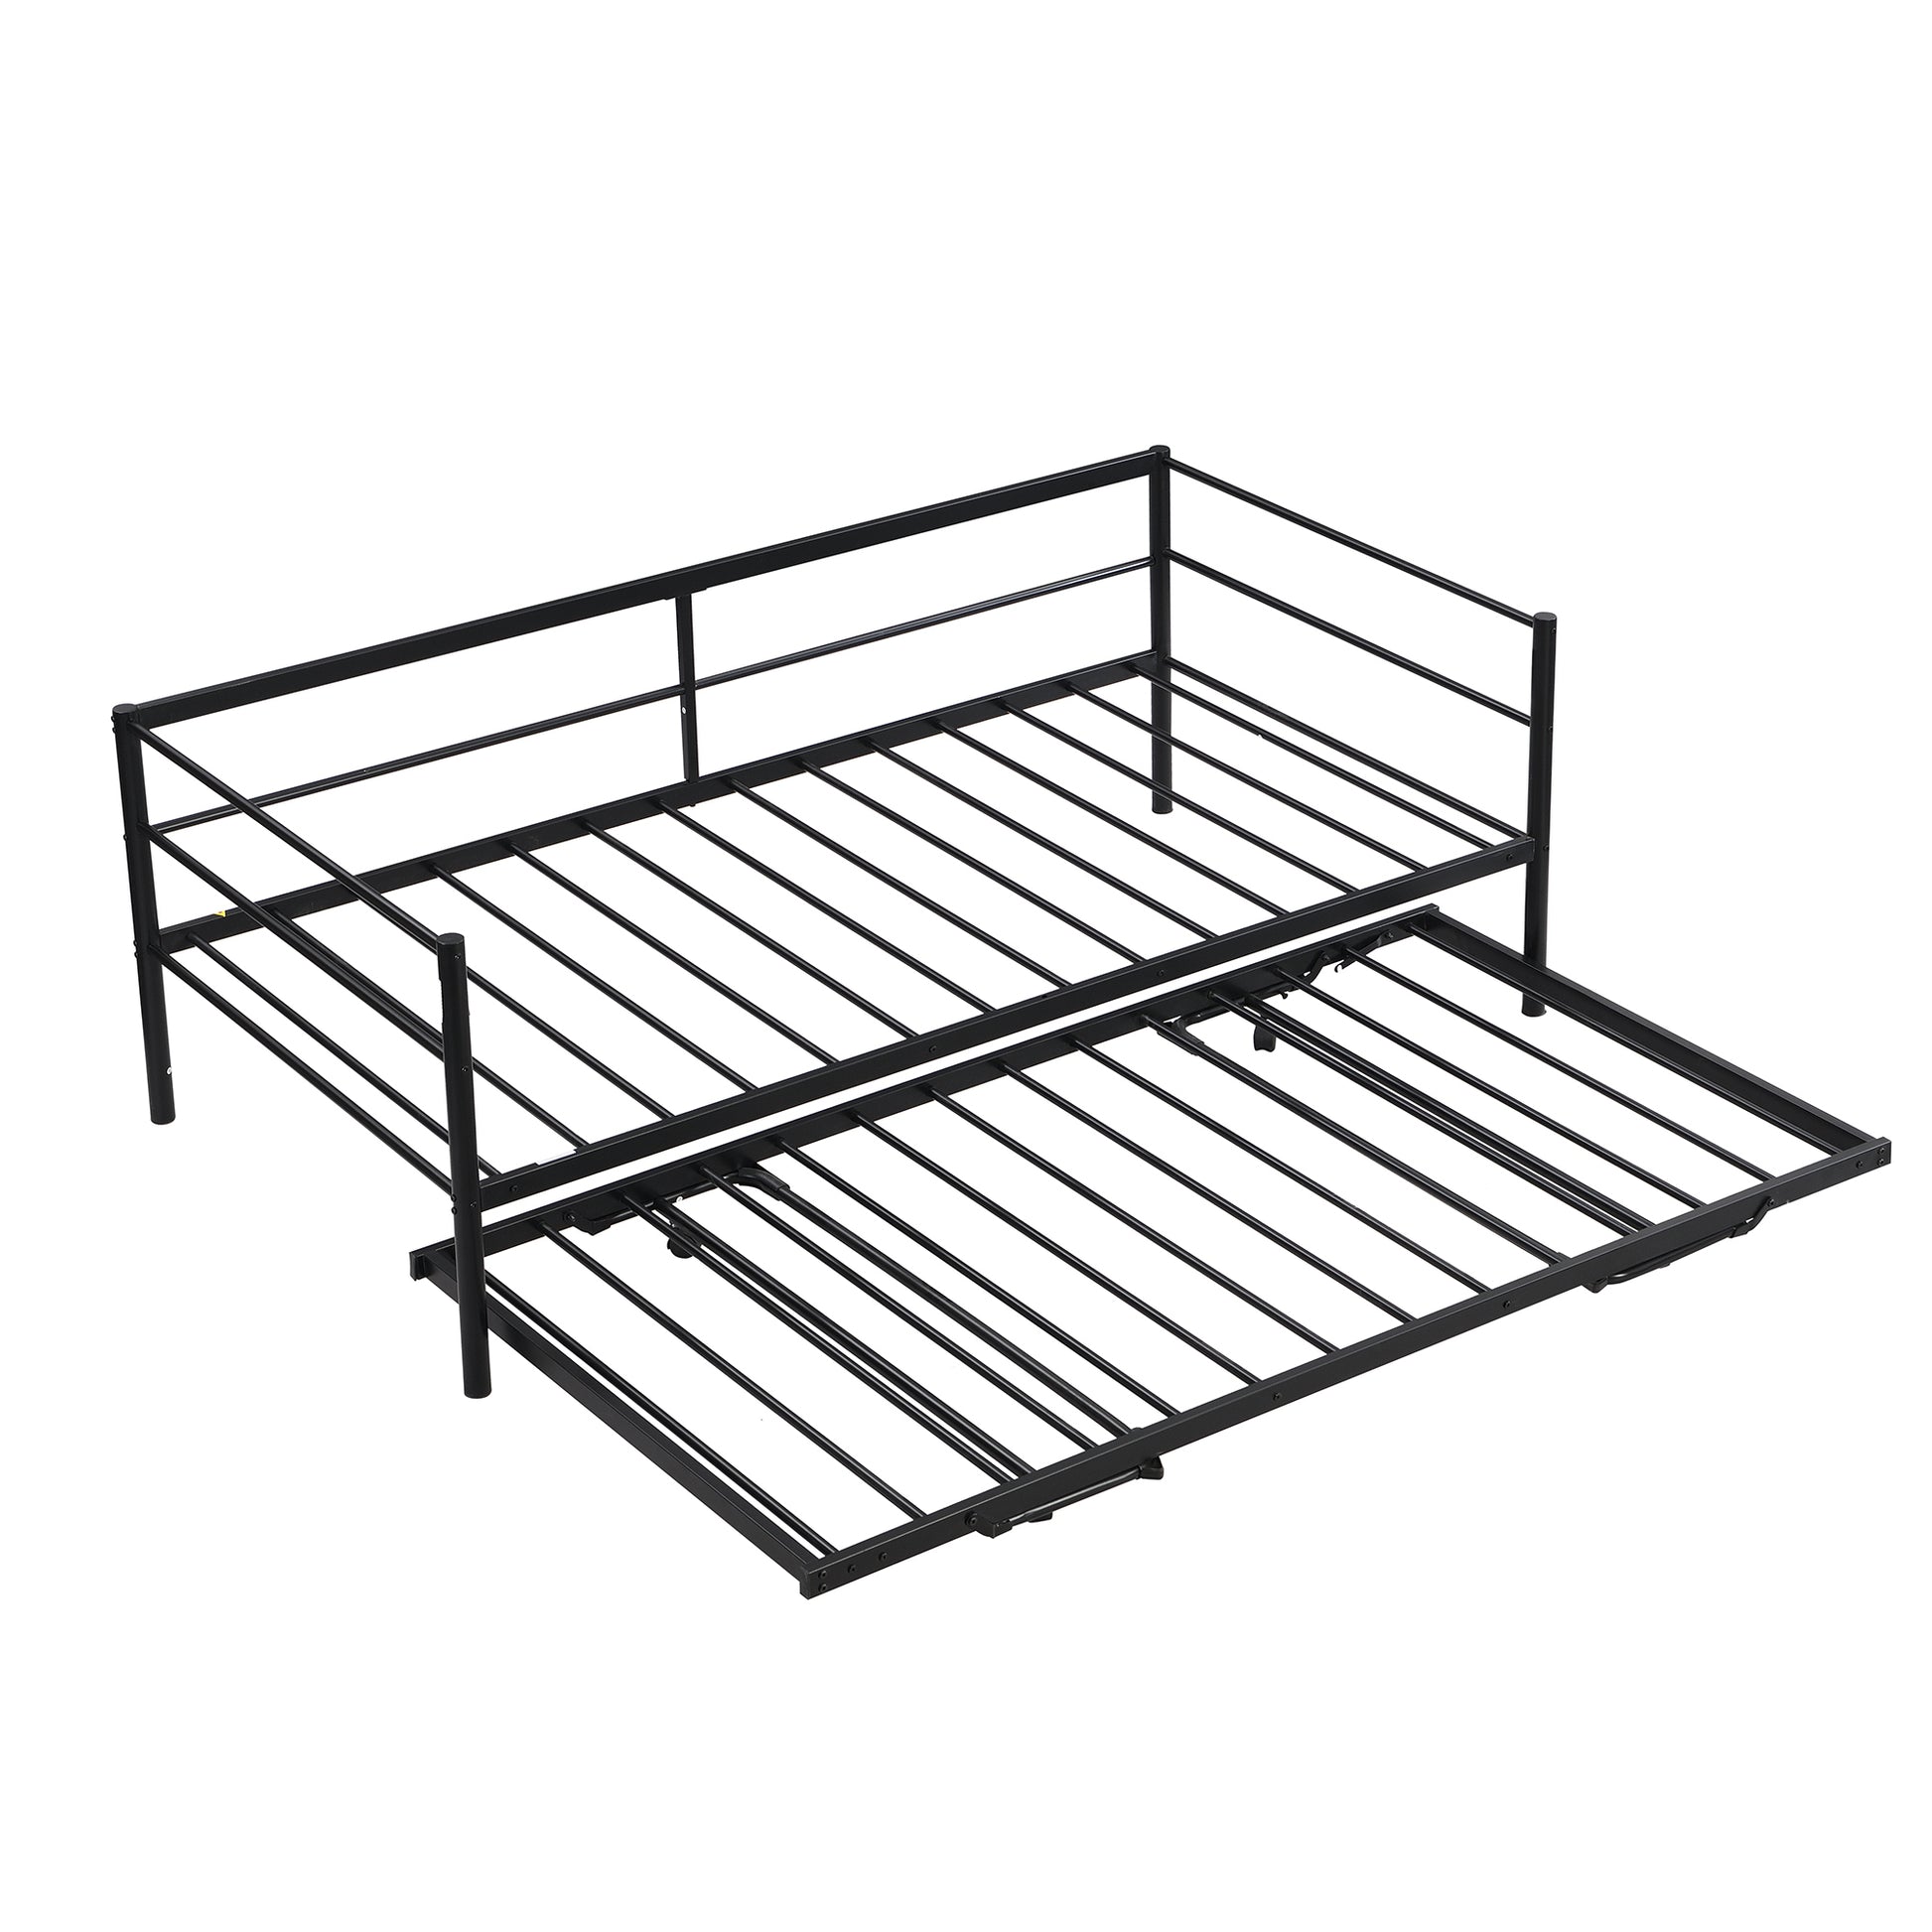 Twin Size Metal Daybed With Adjustable Trundle,